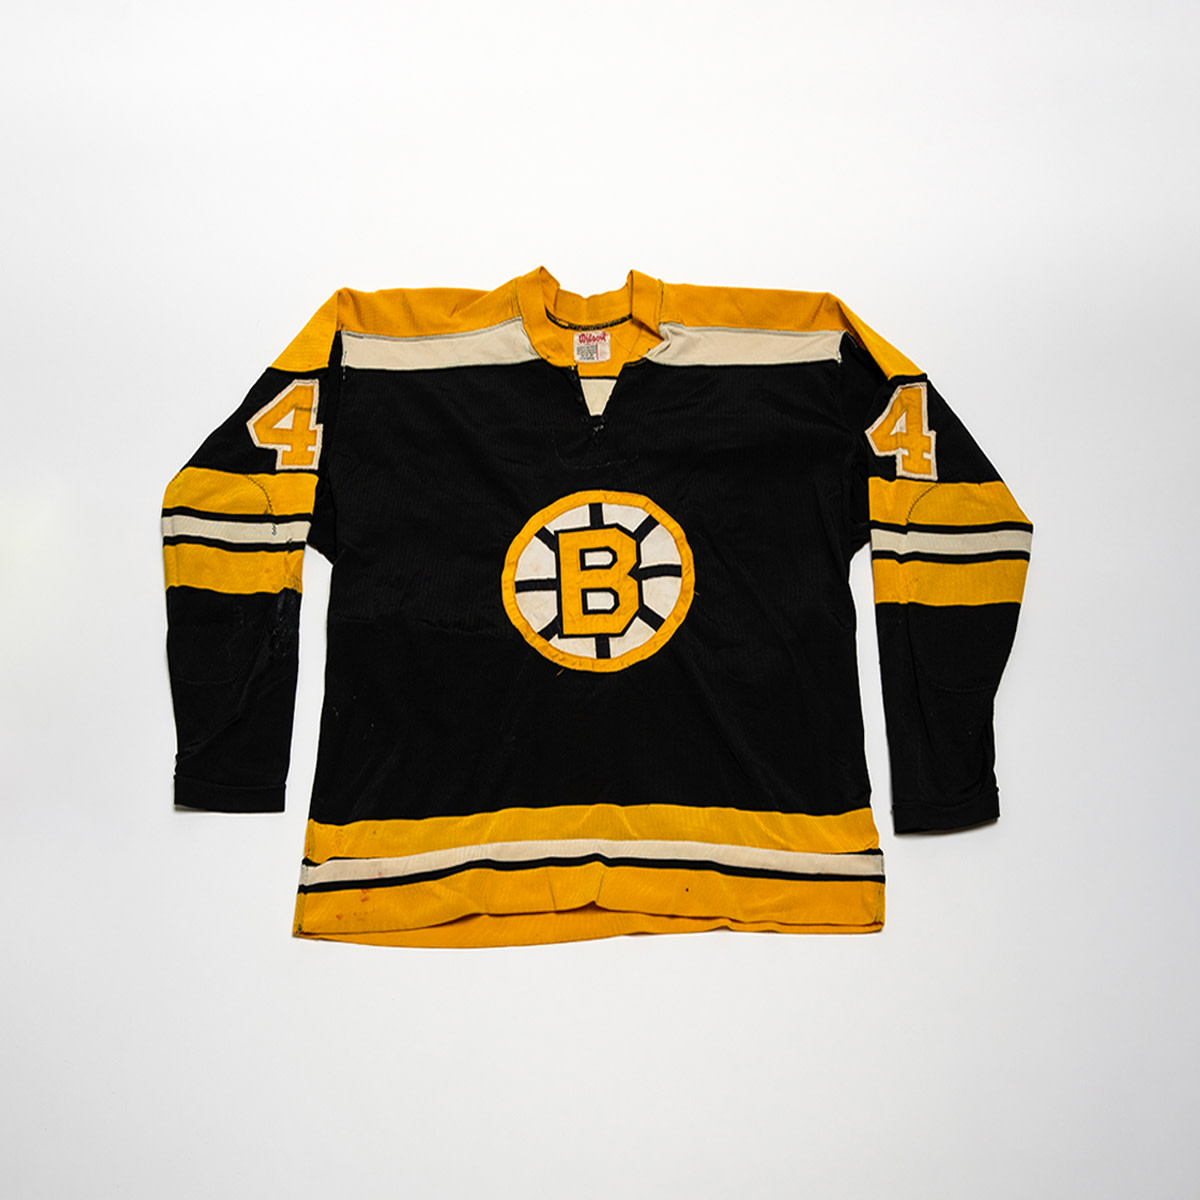 Bobby Orr Autographed Boston Bruins Heroes of Hockey Authentic White Jersey